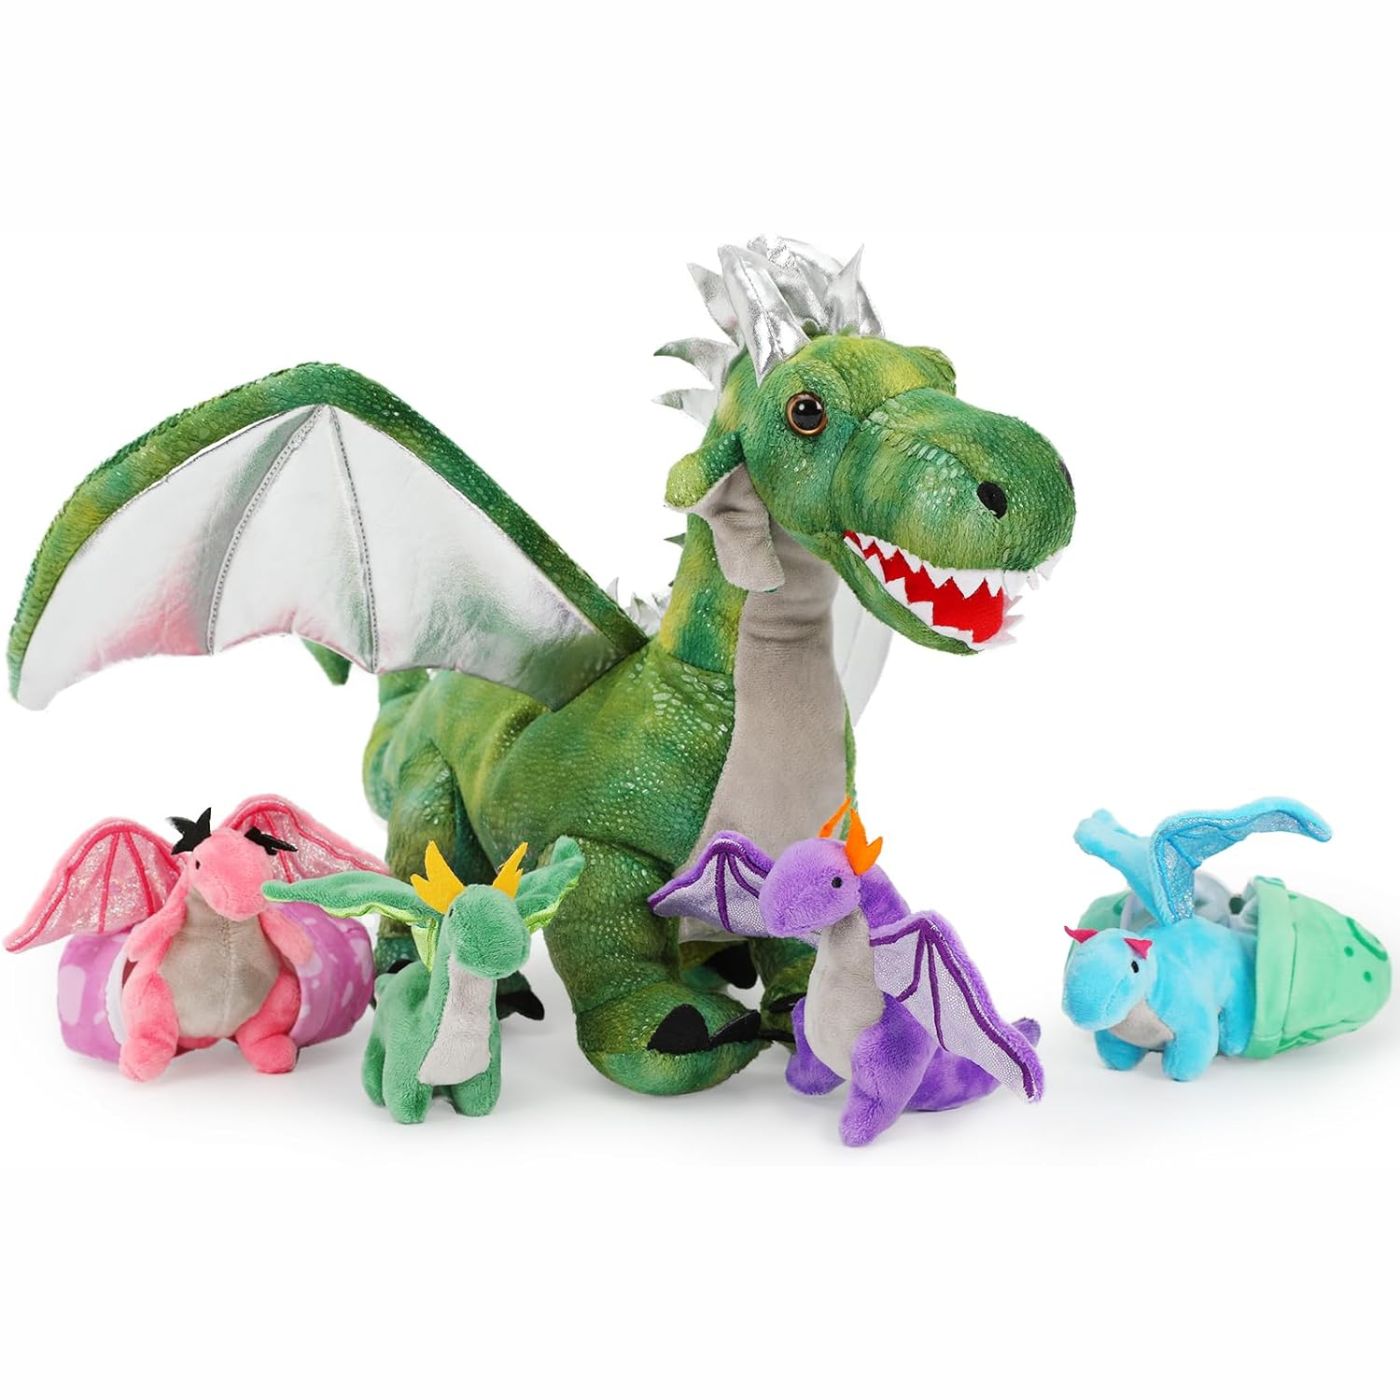 Flying Dragon Stuffed Toy Set, 21.6 Inches You'll absolutely love our marvelous Flying Dragon Plush Toy. It arrives with 4 cool mini dragon plushies and 2 adorable dragon eggs. This plushie set is made from the softest faux fur and plush PP cotton filling, not just making it look impressive but also making it cuddly. A fantastic present for anyone who loves stuffed toys!